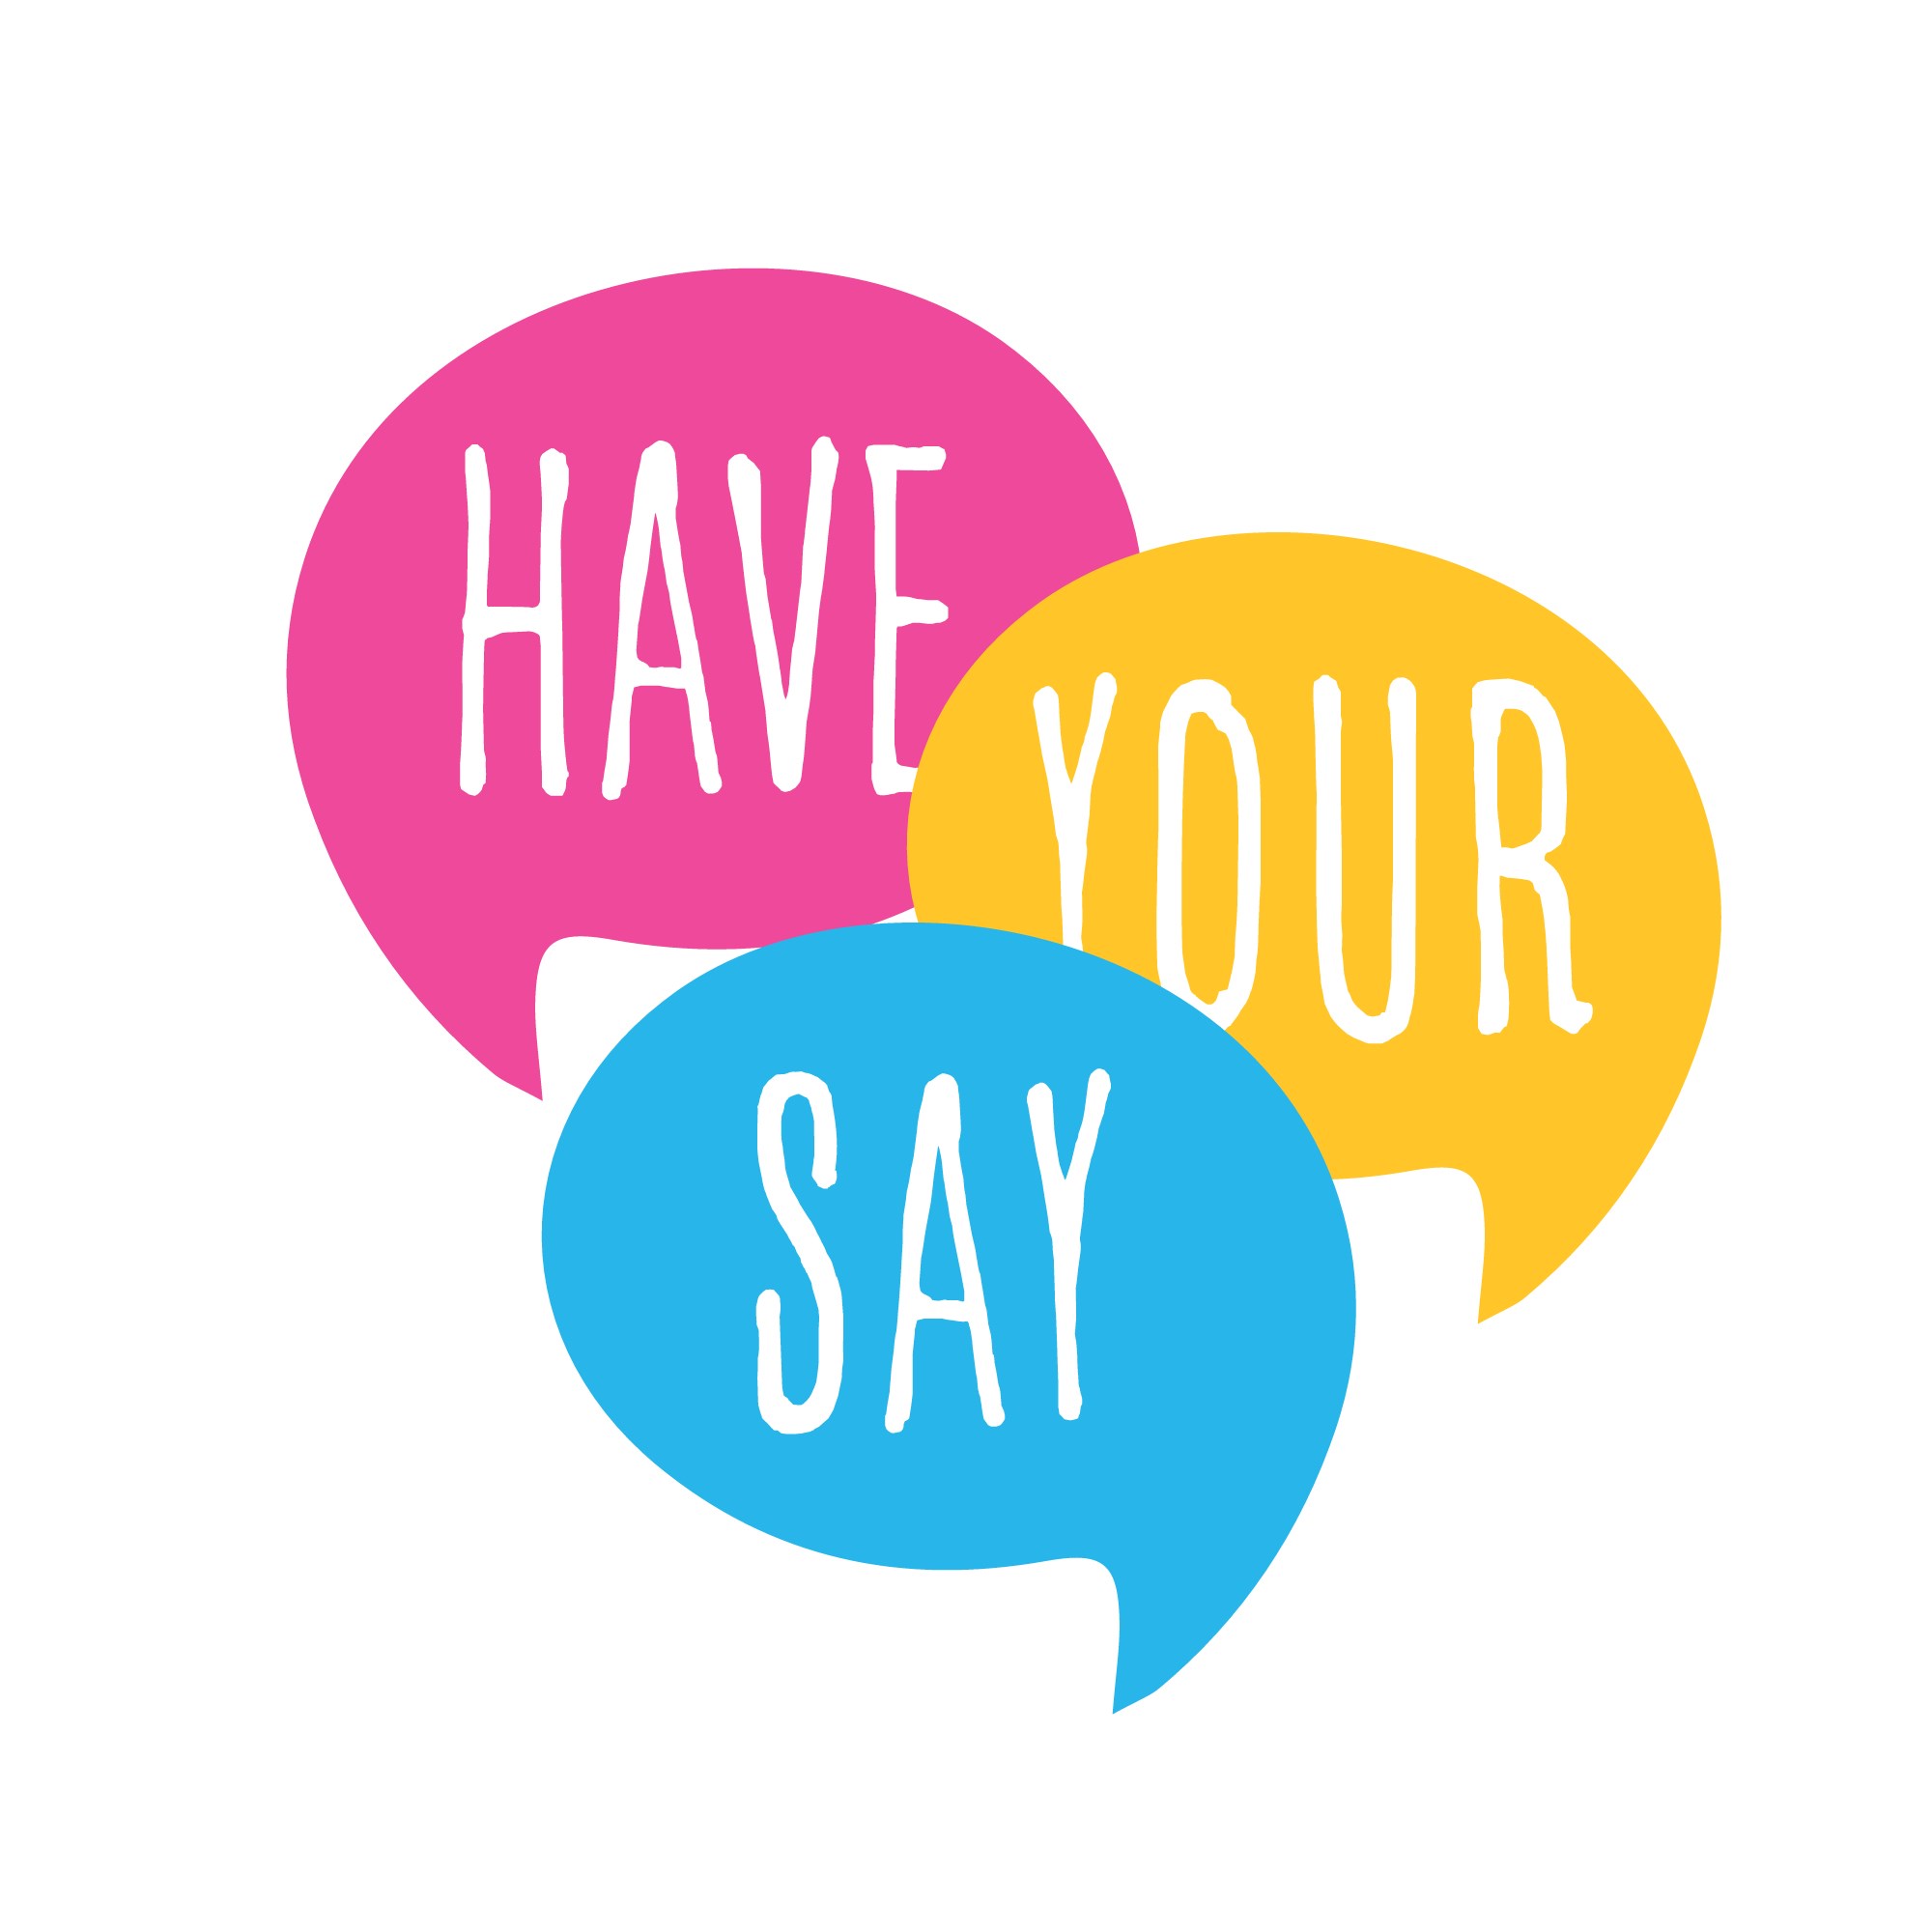 Have your say in speech bubbles